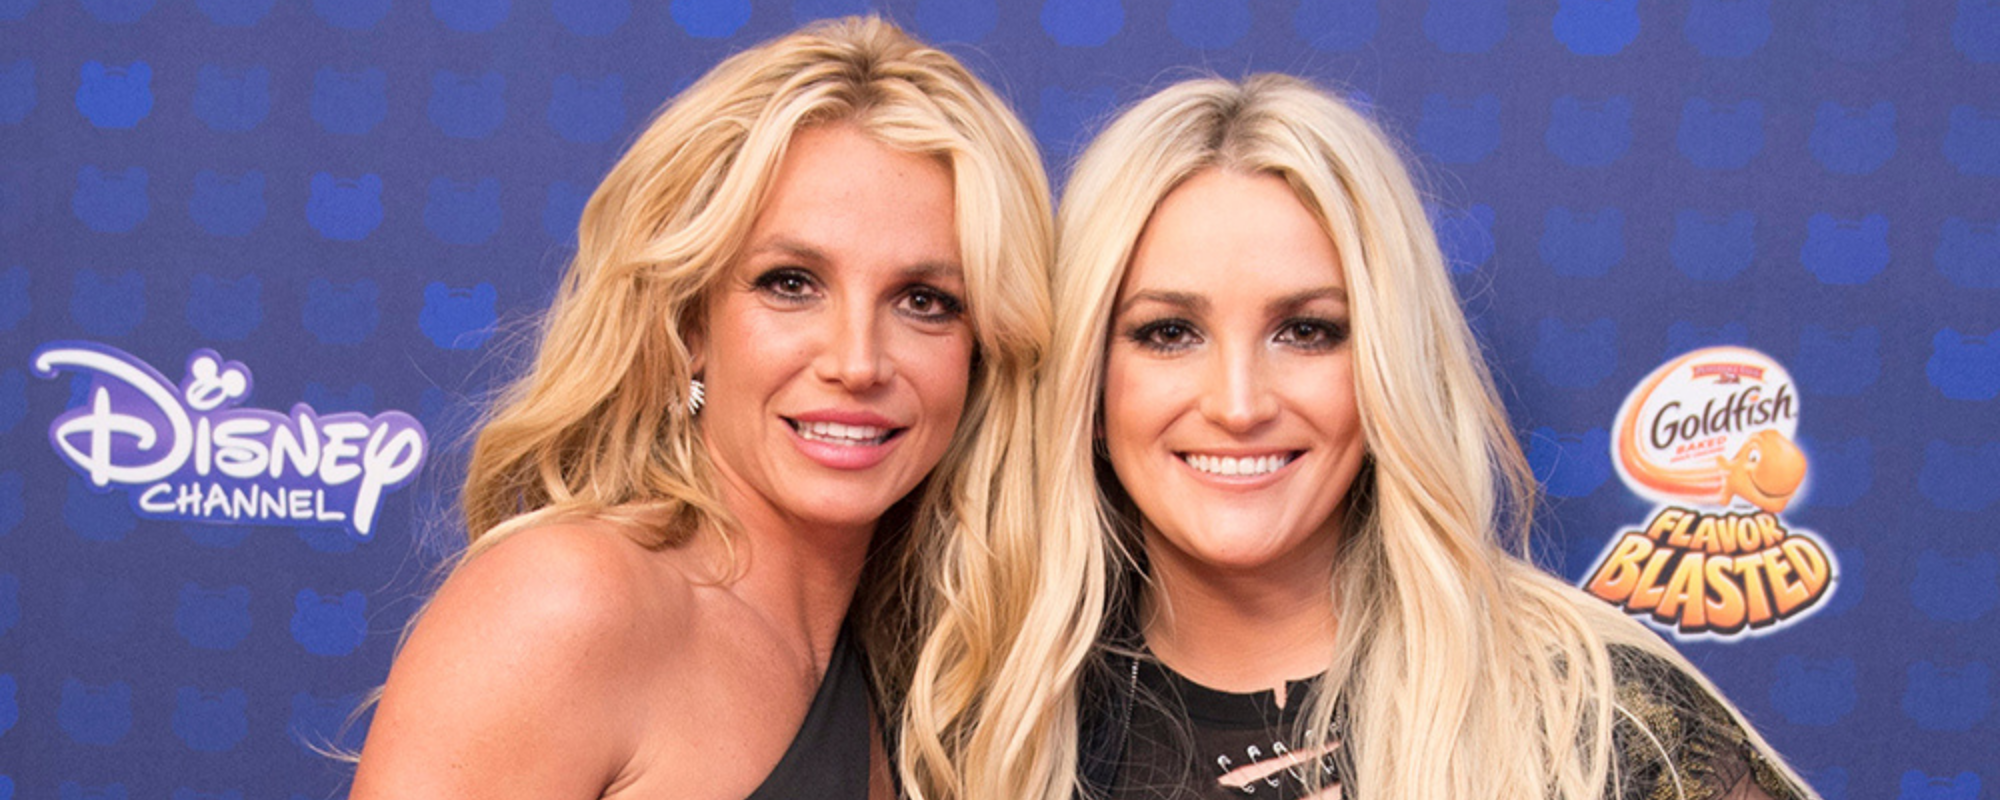 Jamie Lynn Spears Speaks Out About Conservatorship: ”I Supported My Sister Long Before There Was A Hashtag“